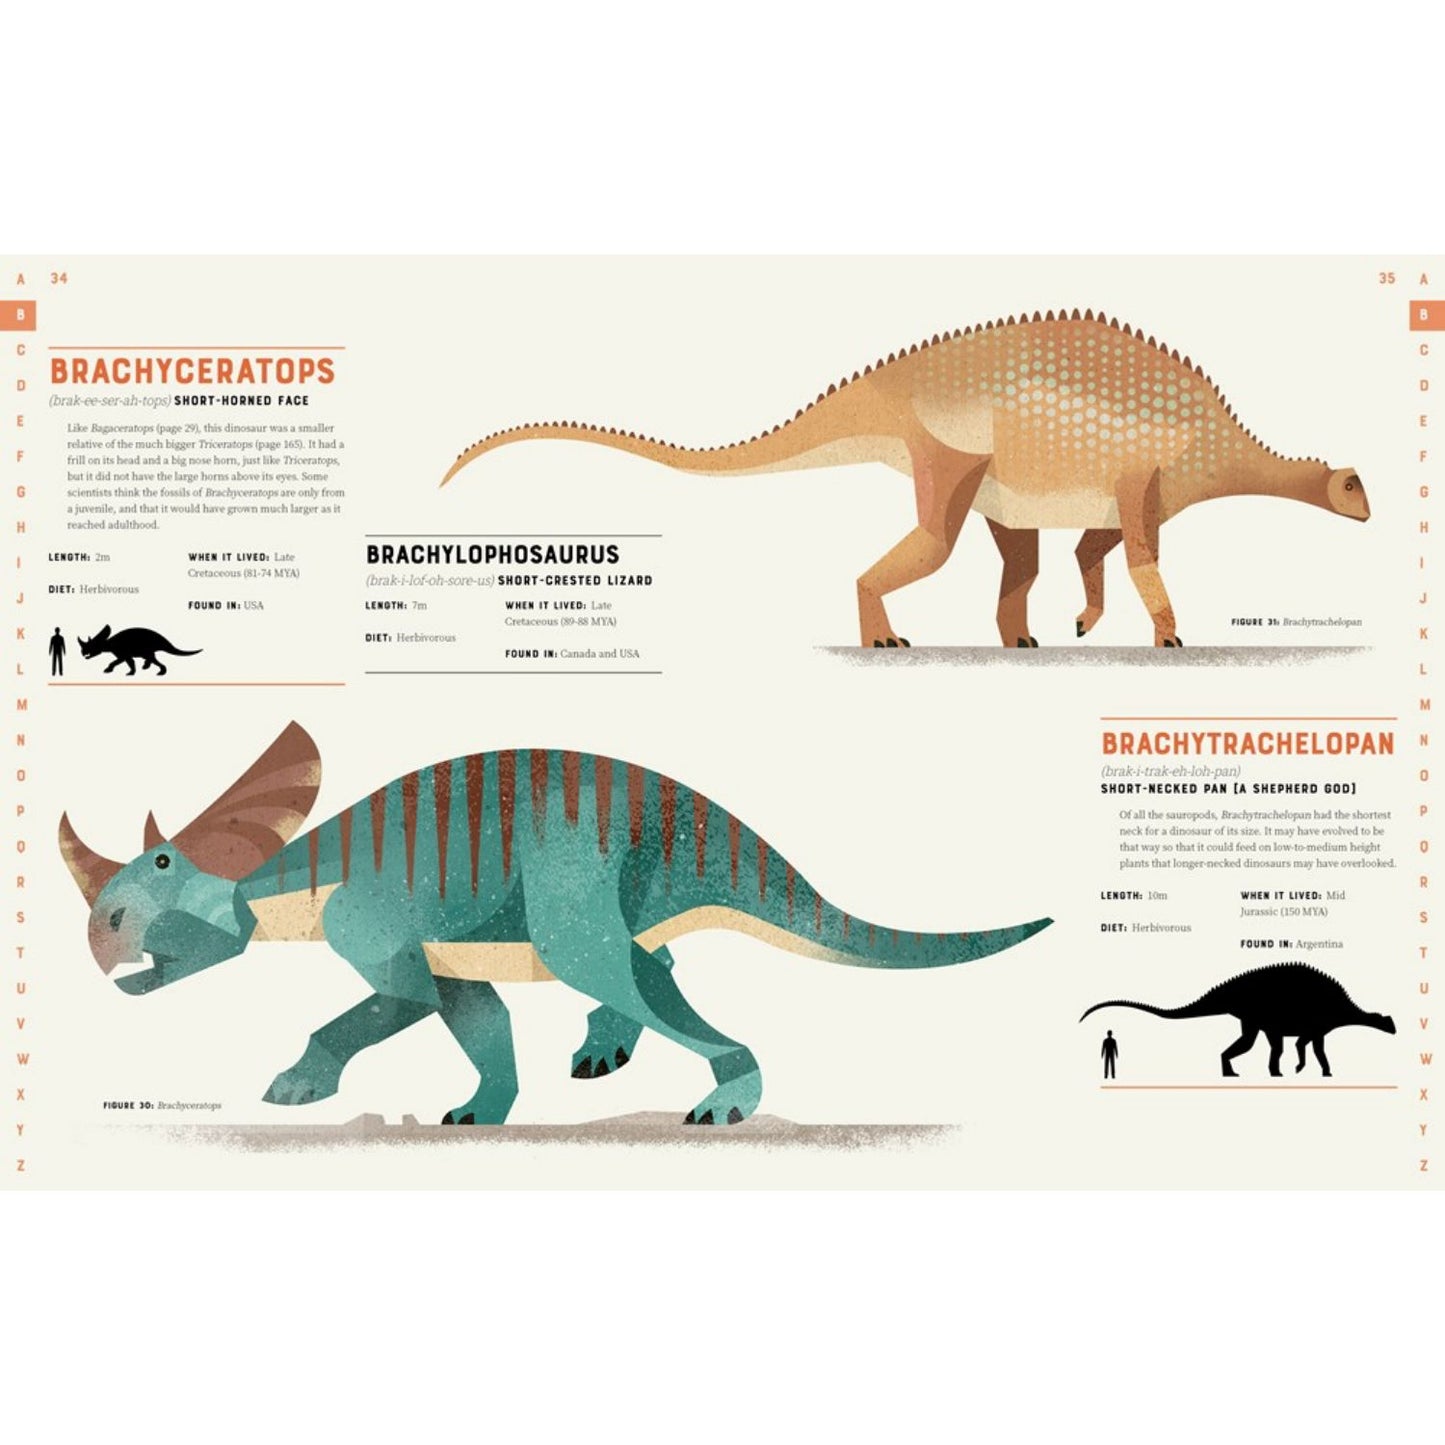 Dictionary of Dinosaurs | Paperback | Children’s Book on Nature